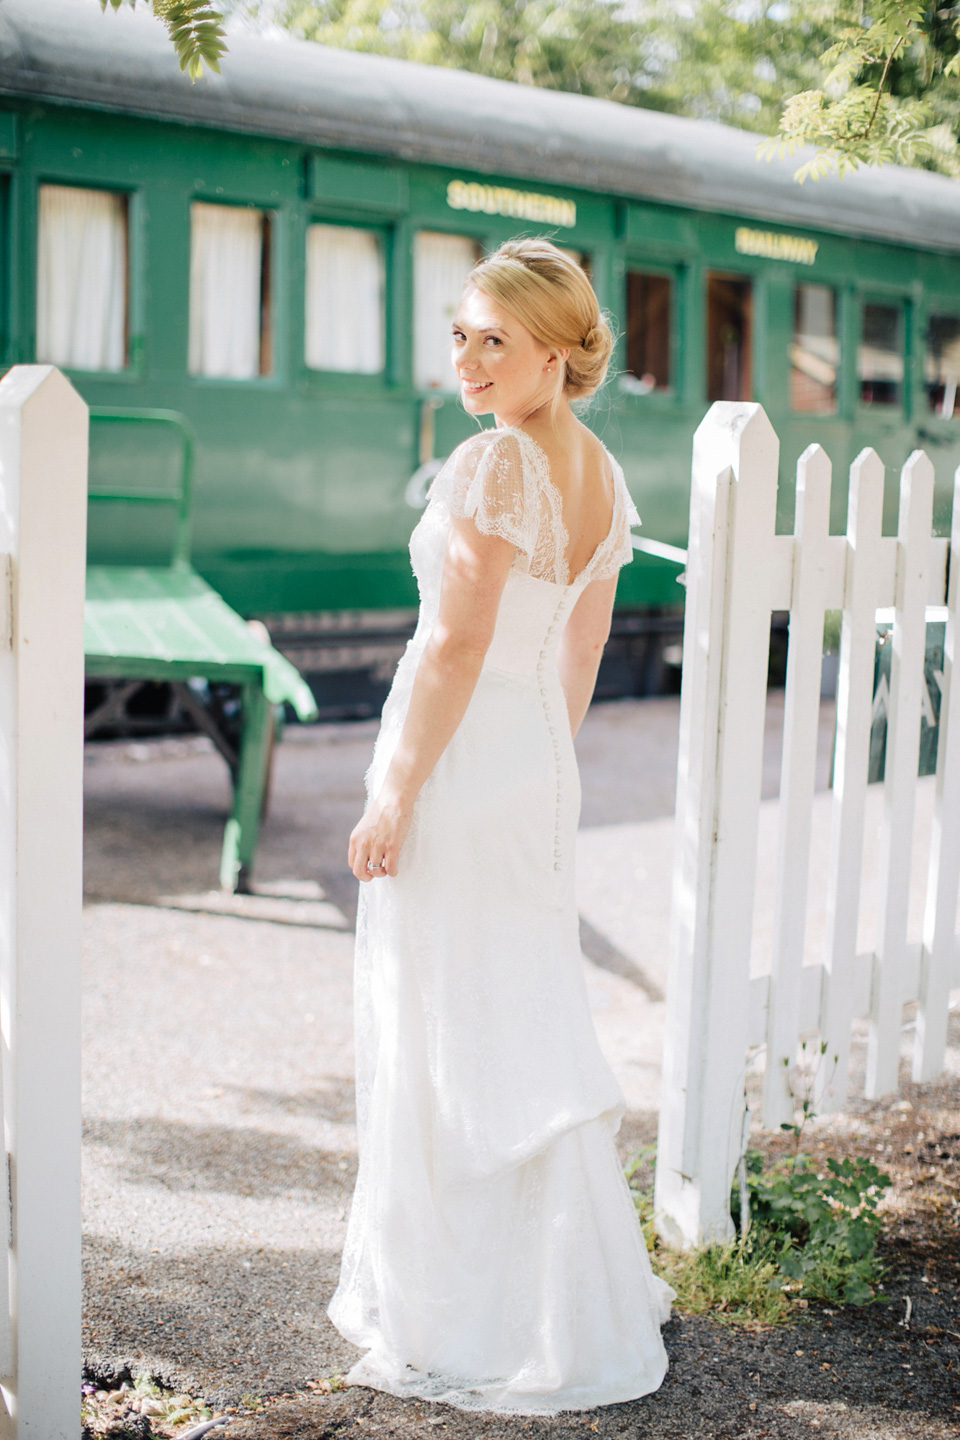 The bride wears Suzanne Neville for her Summer wedding at a vintage railway station. Images by M&J Photography.